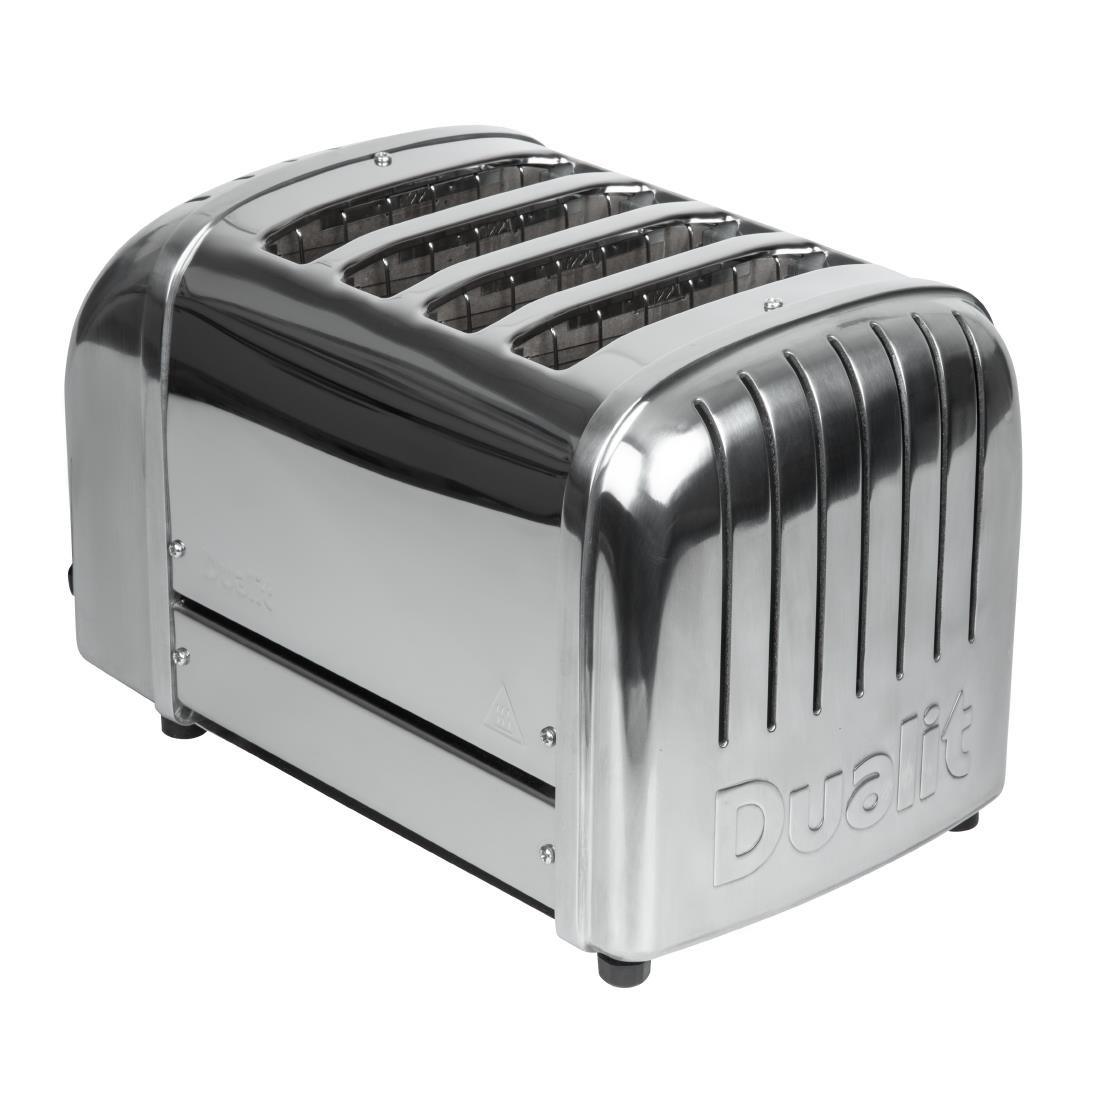 Grille-pain professionnel - 7240 - Milan Toast - 4 tranches